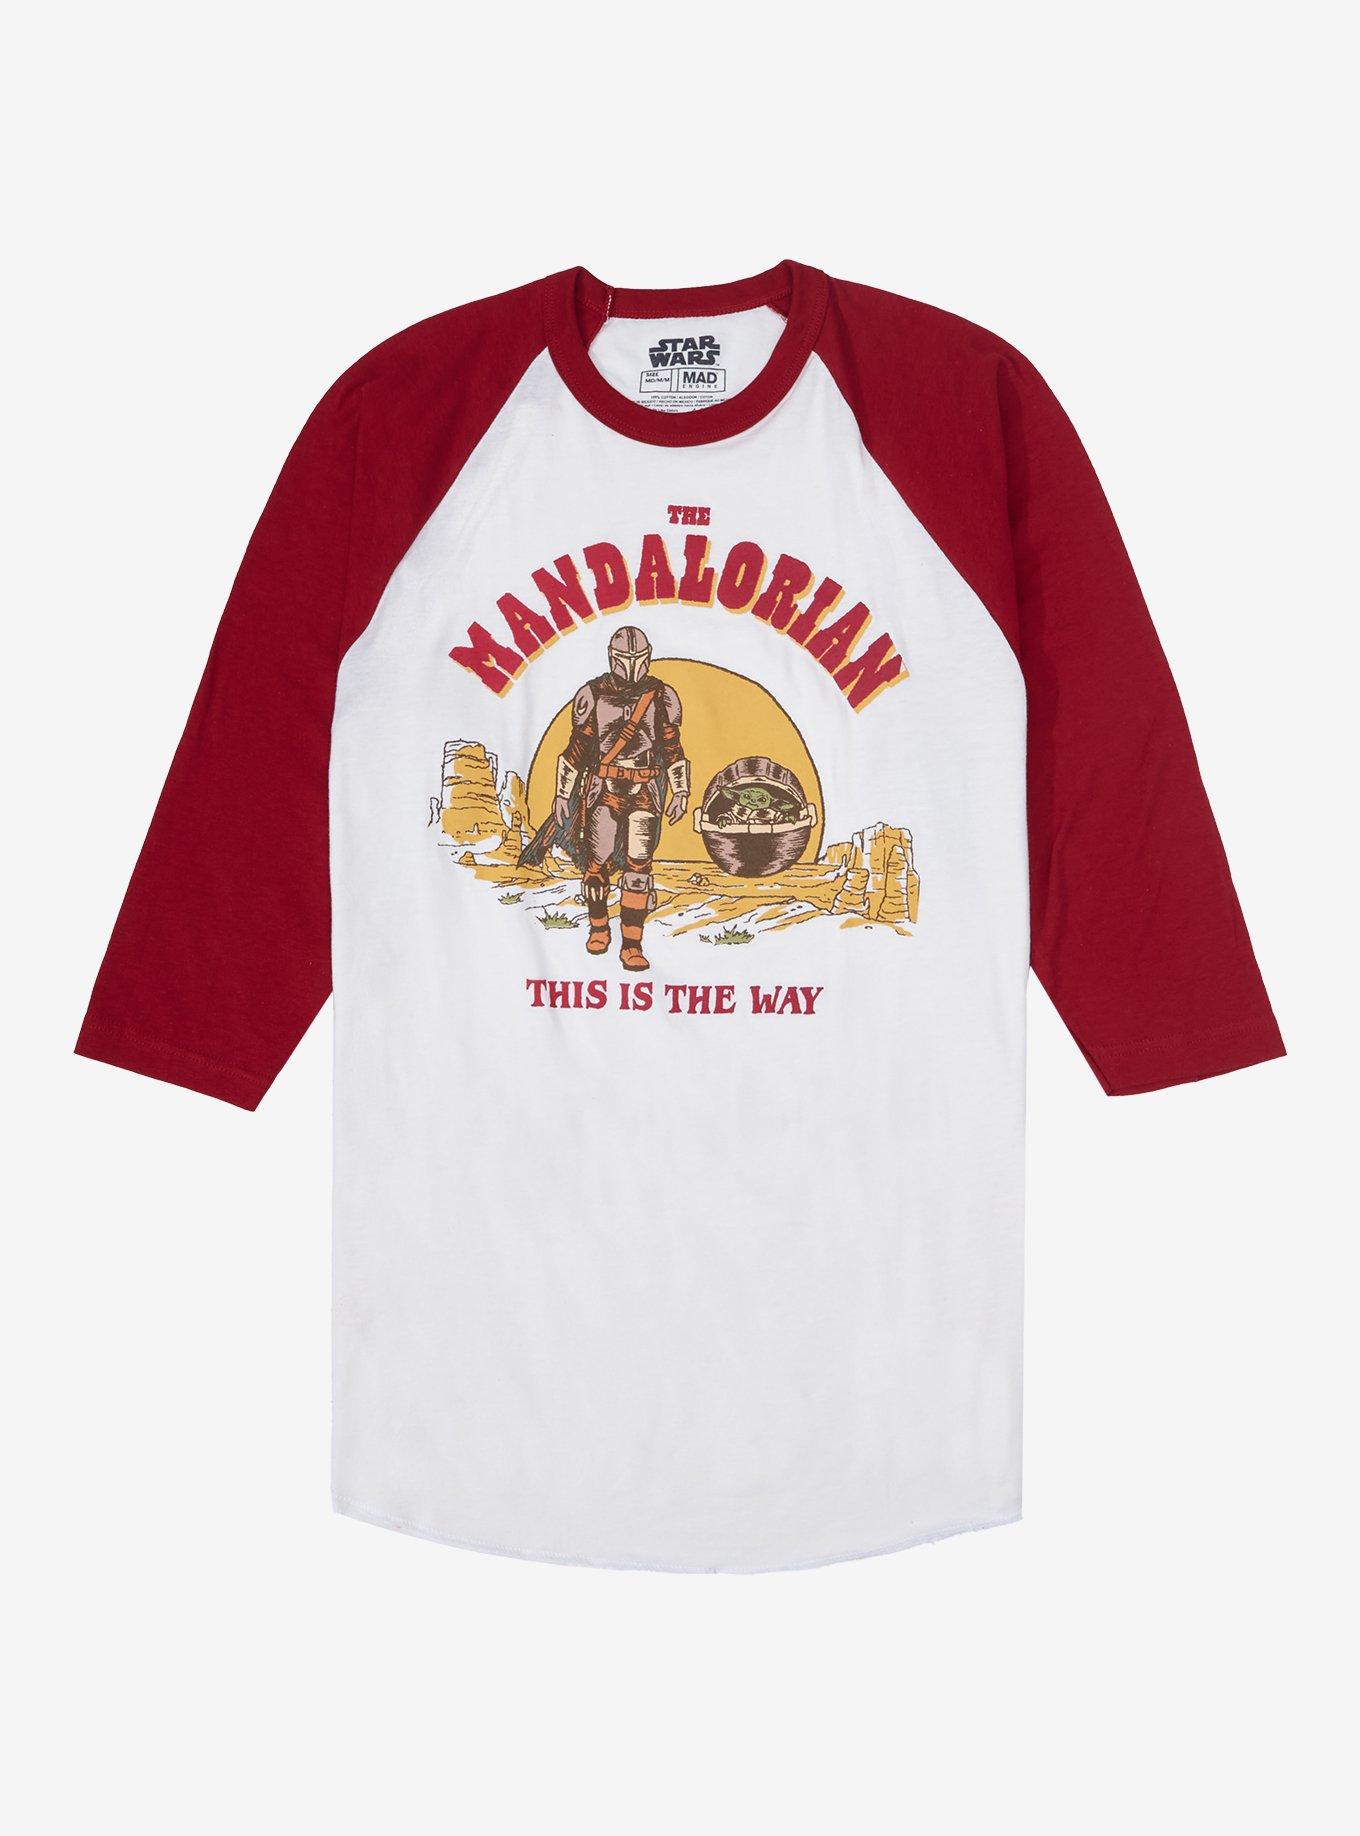 Star Wars The | BoxLunch the - Raglan T-Shirt BoxLunch Mandalorian is This Way Exclusive